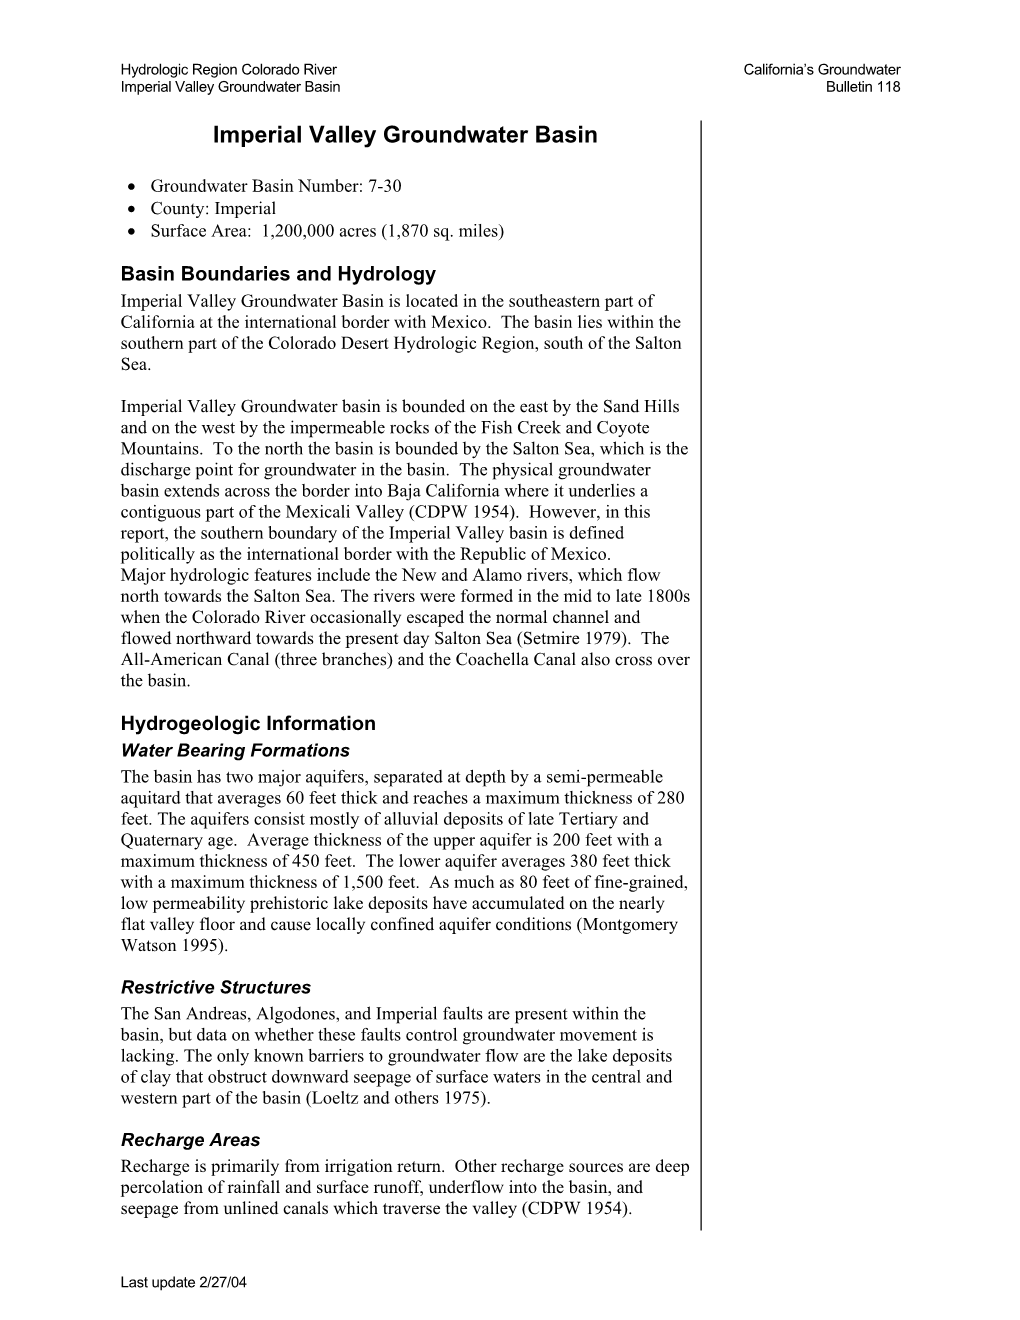 Imperial Valley Groundwater Basin Bulletin 118